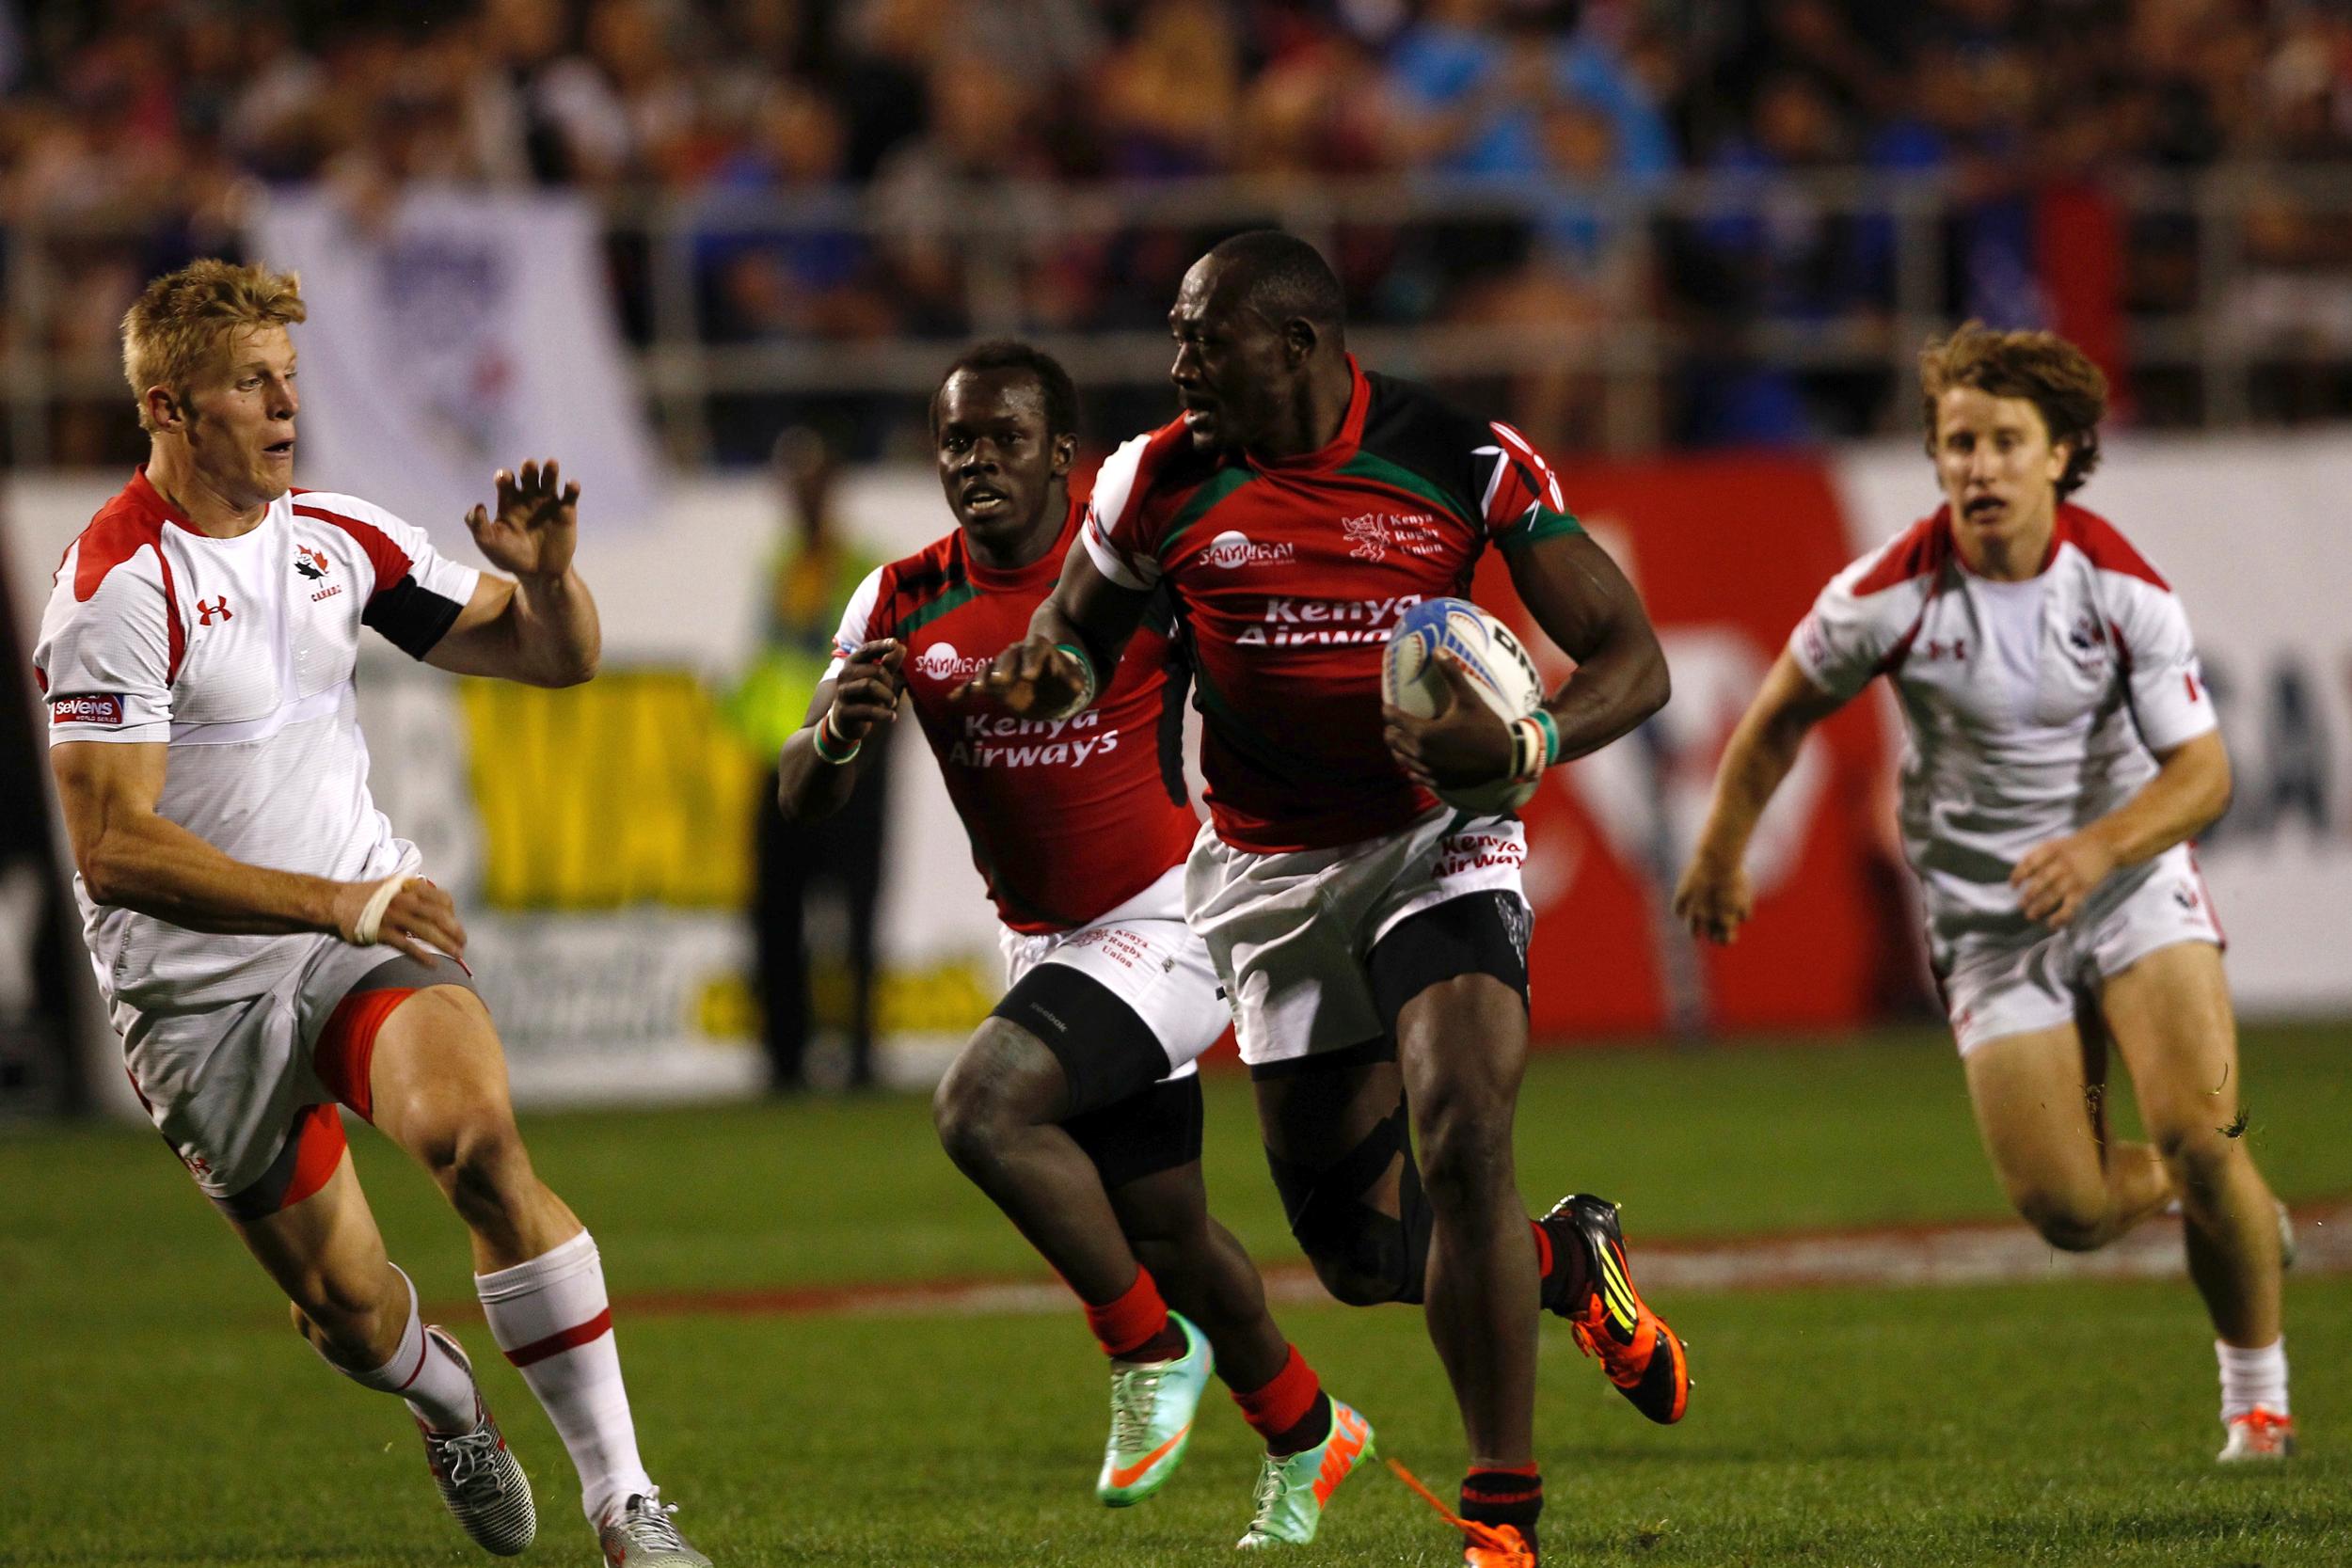 Kenya's narrow 22-21 victory over Canada could prove vital in a tight Pool C ©World Rugby